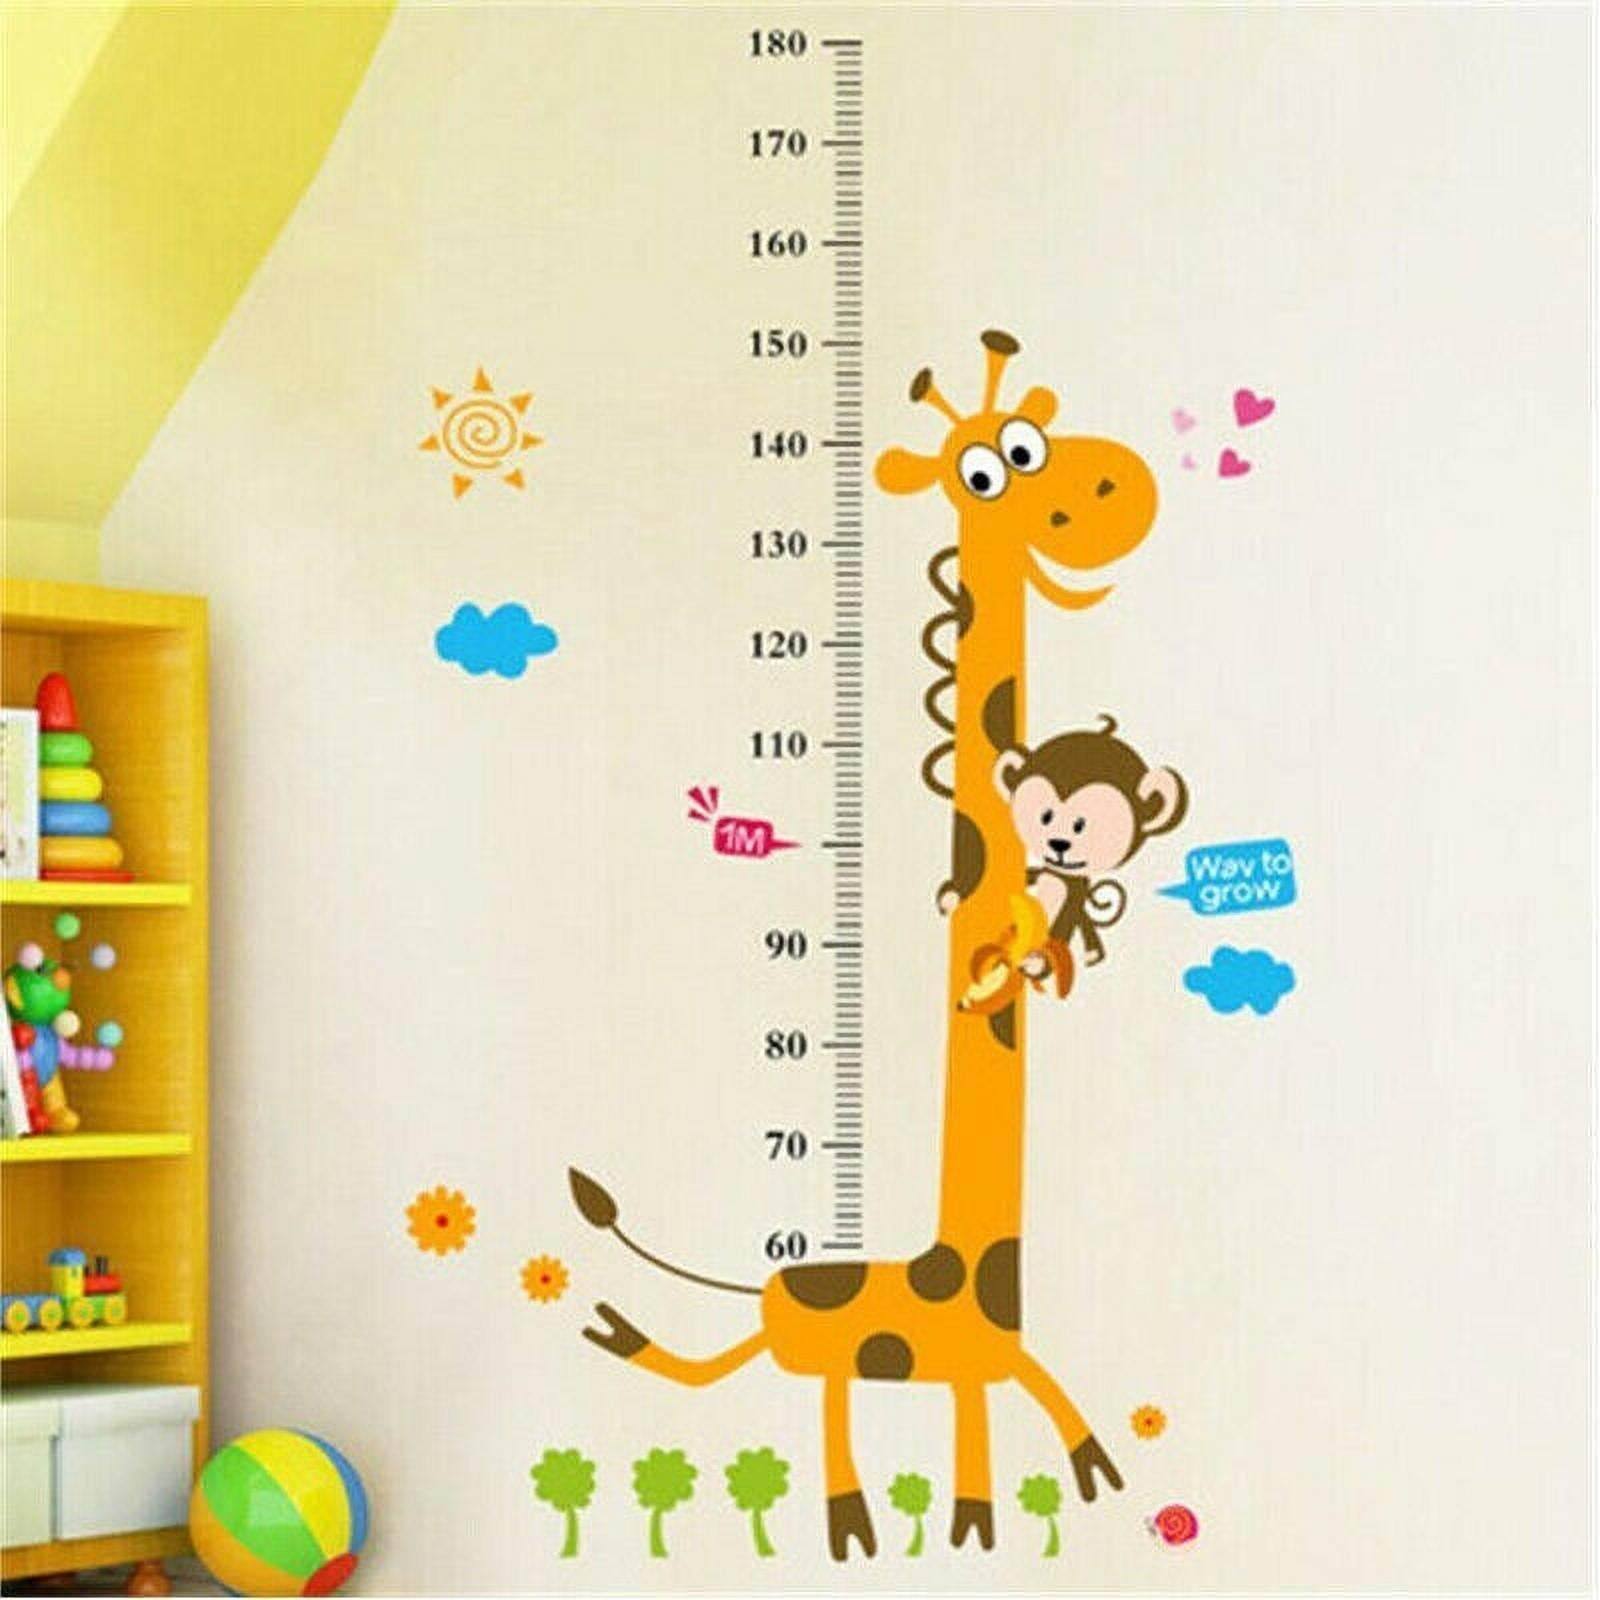 Height Wall Chart Growth Chart With Jungle Animals Kid decals Wall Decal 